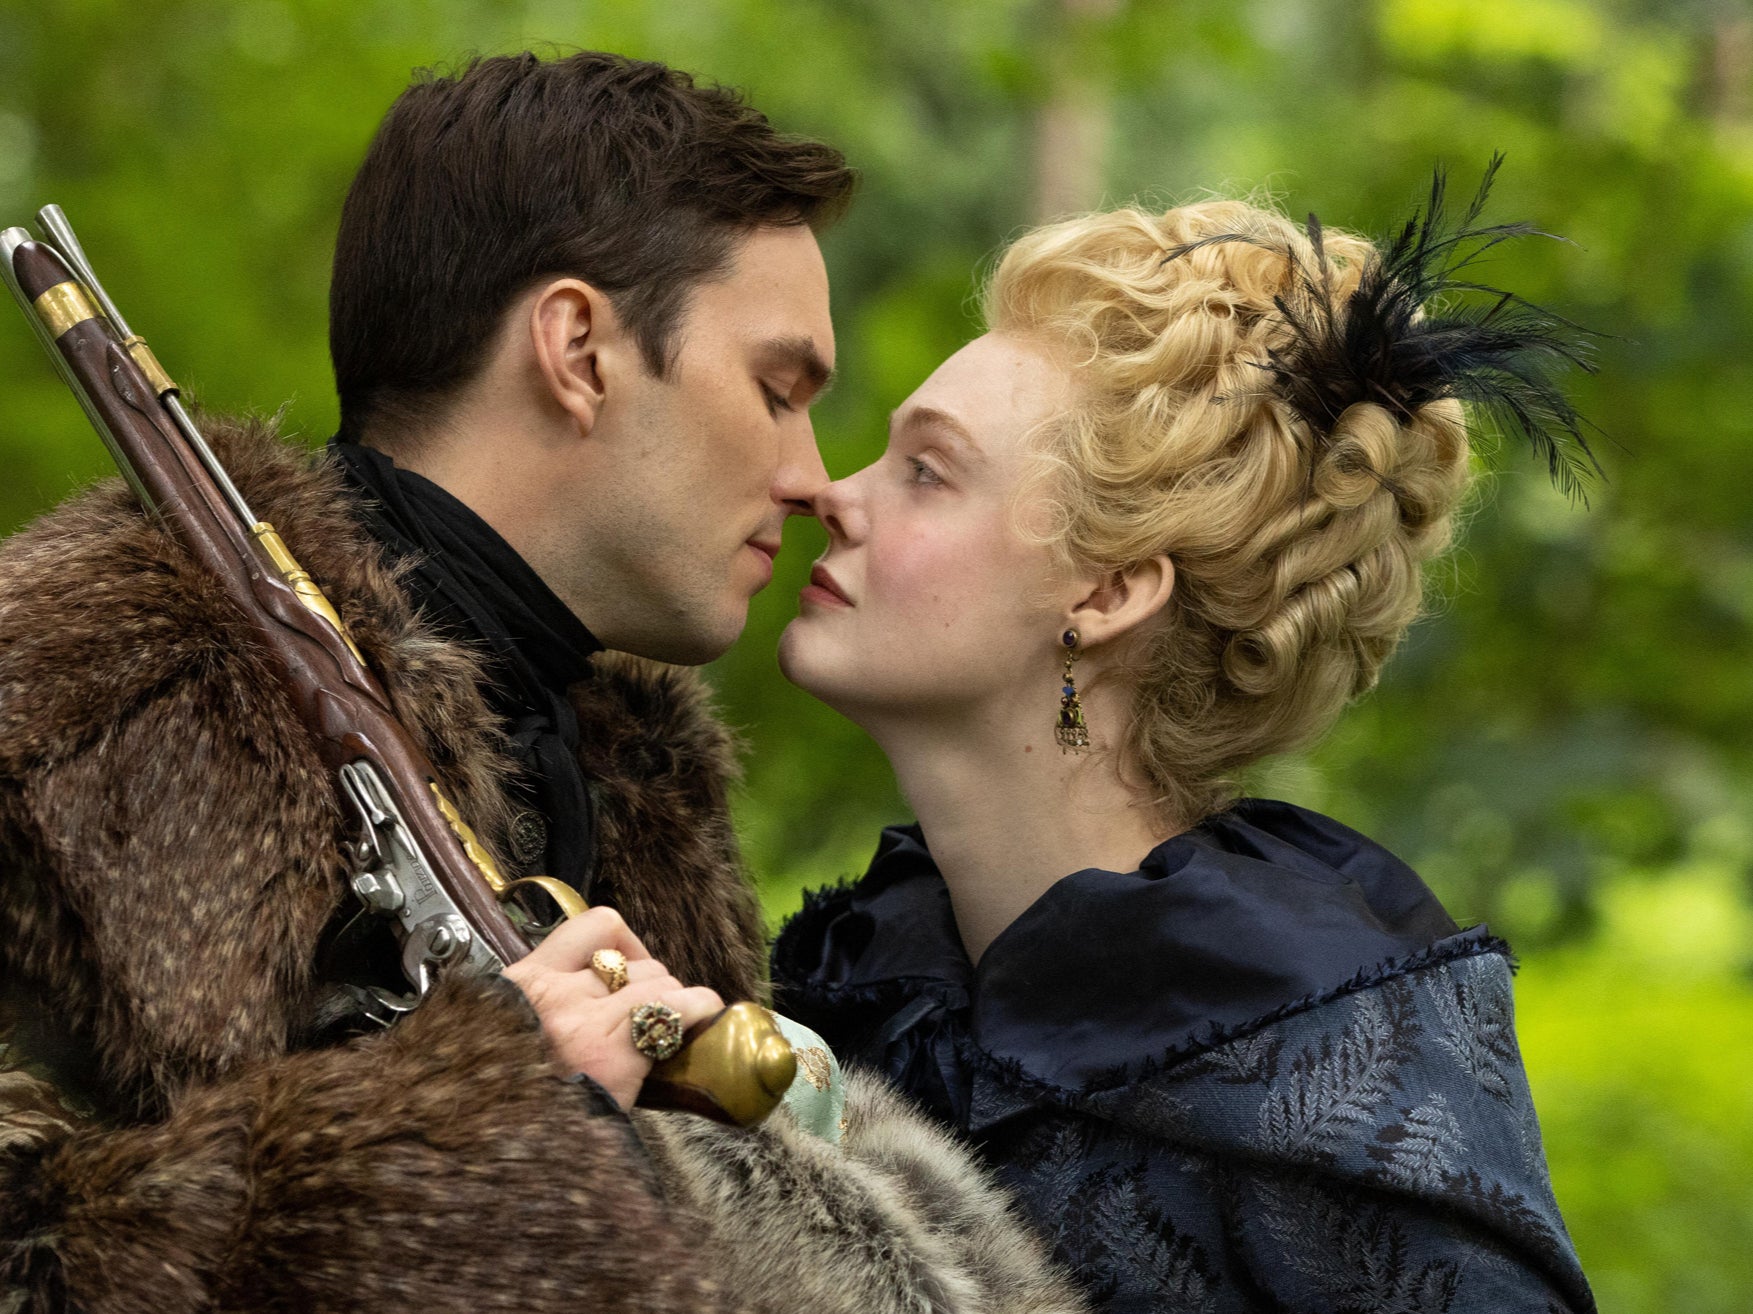 Lovers in arms: Nicholas Hoult and Elle Fanning in ‘The Great'